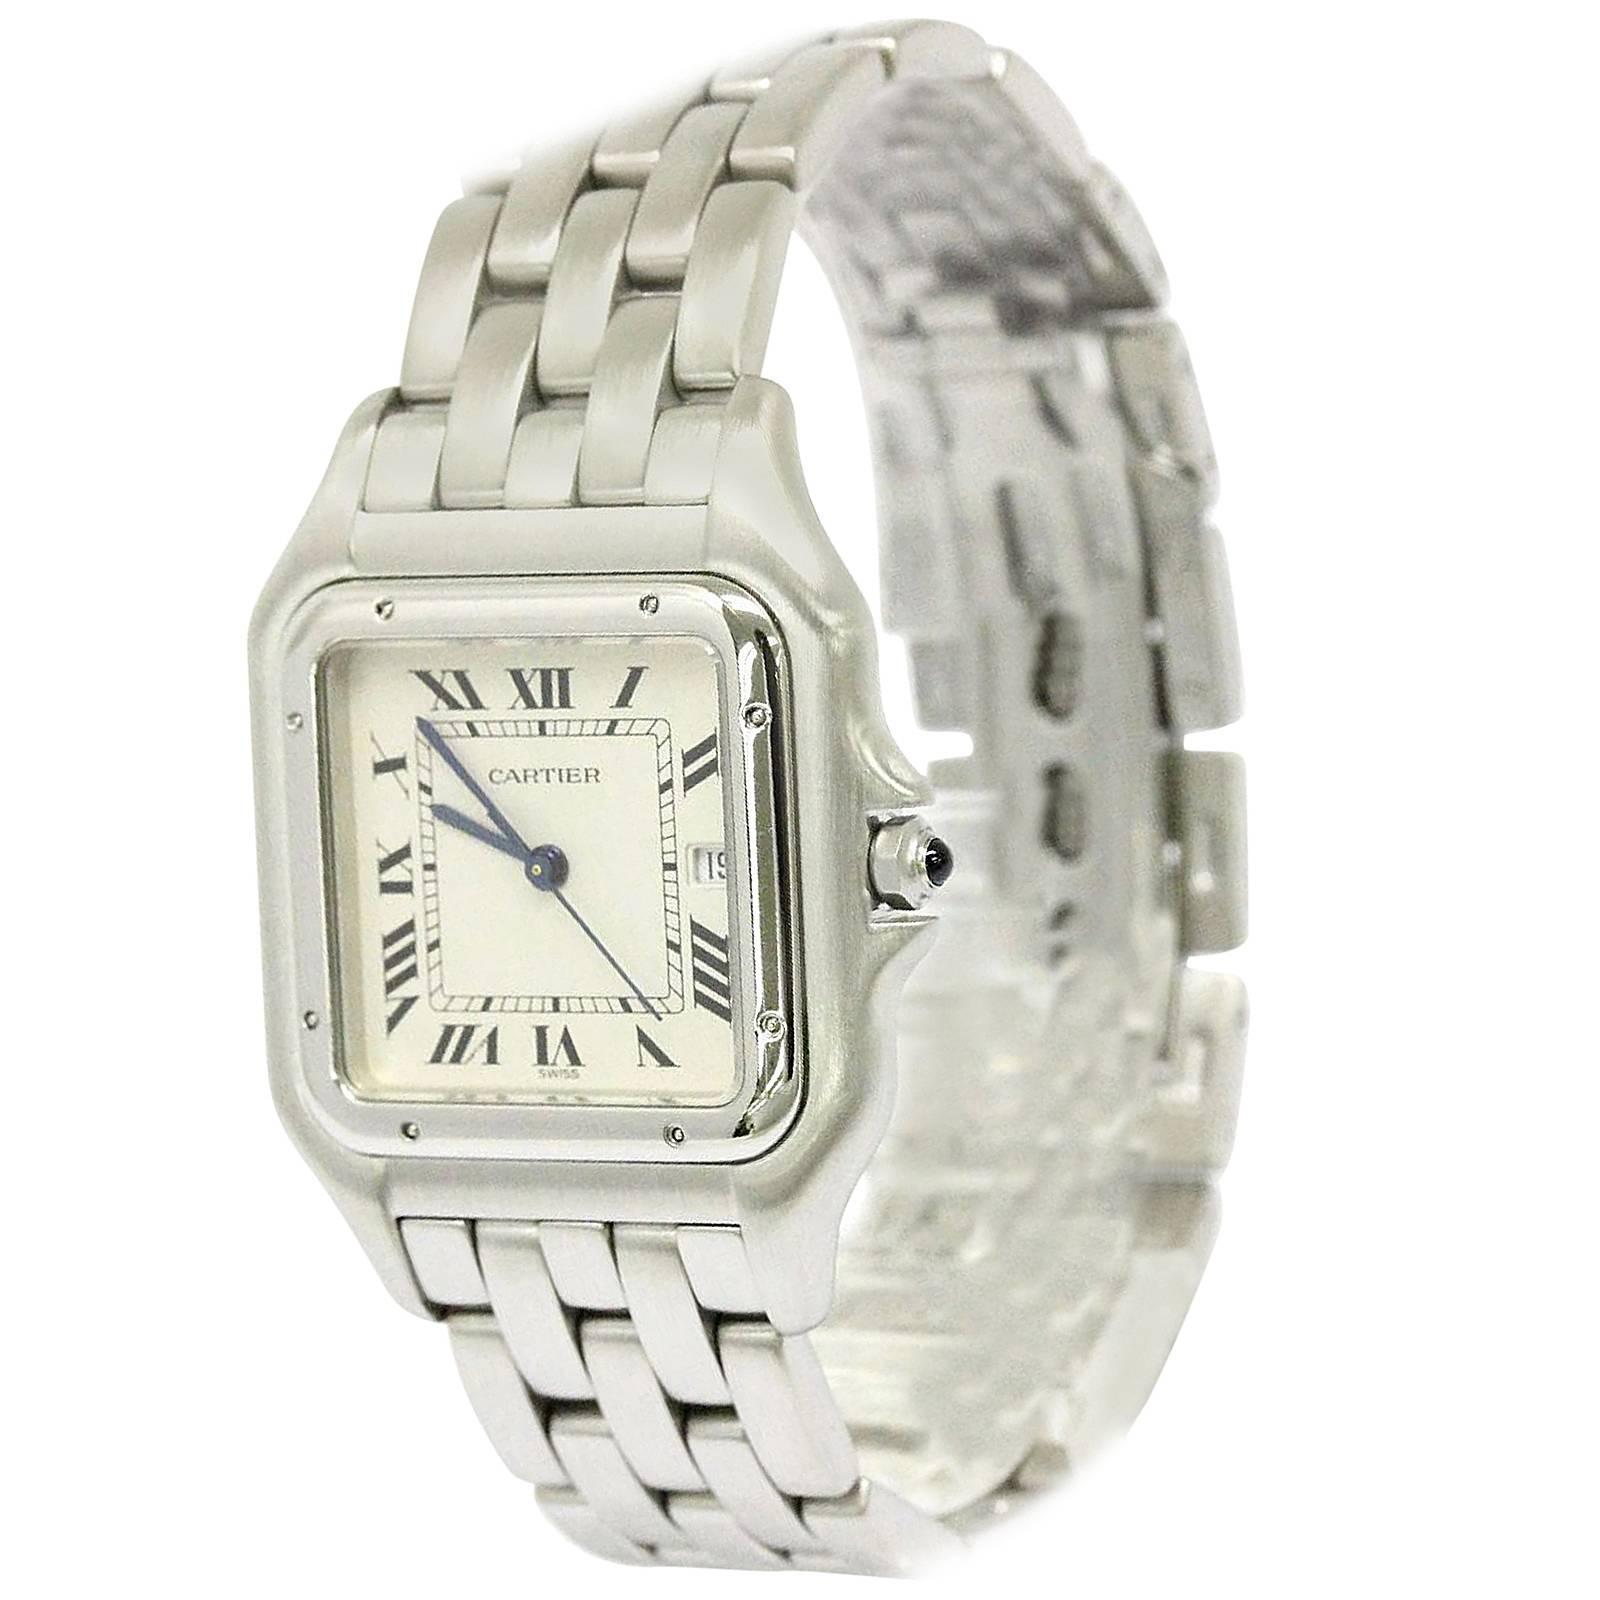 Cartier Panthere Datejust Stainless Steel Chain Link Mid Size Watch in Box